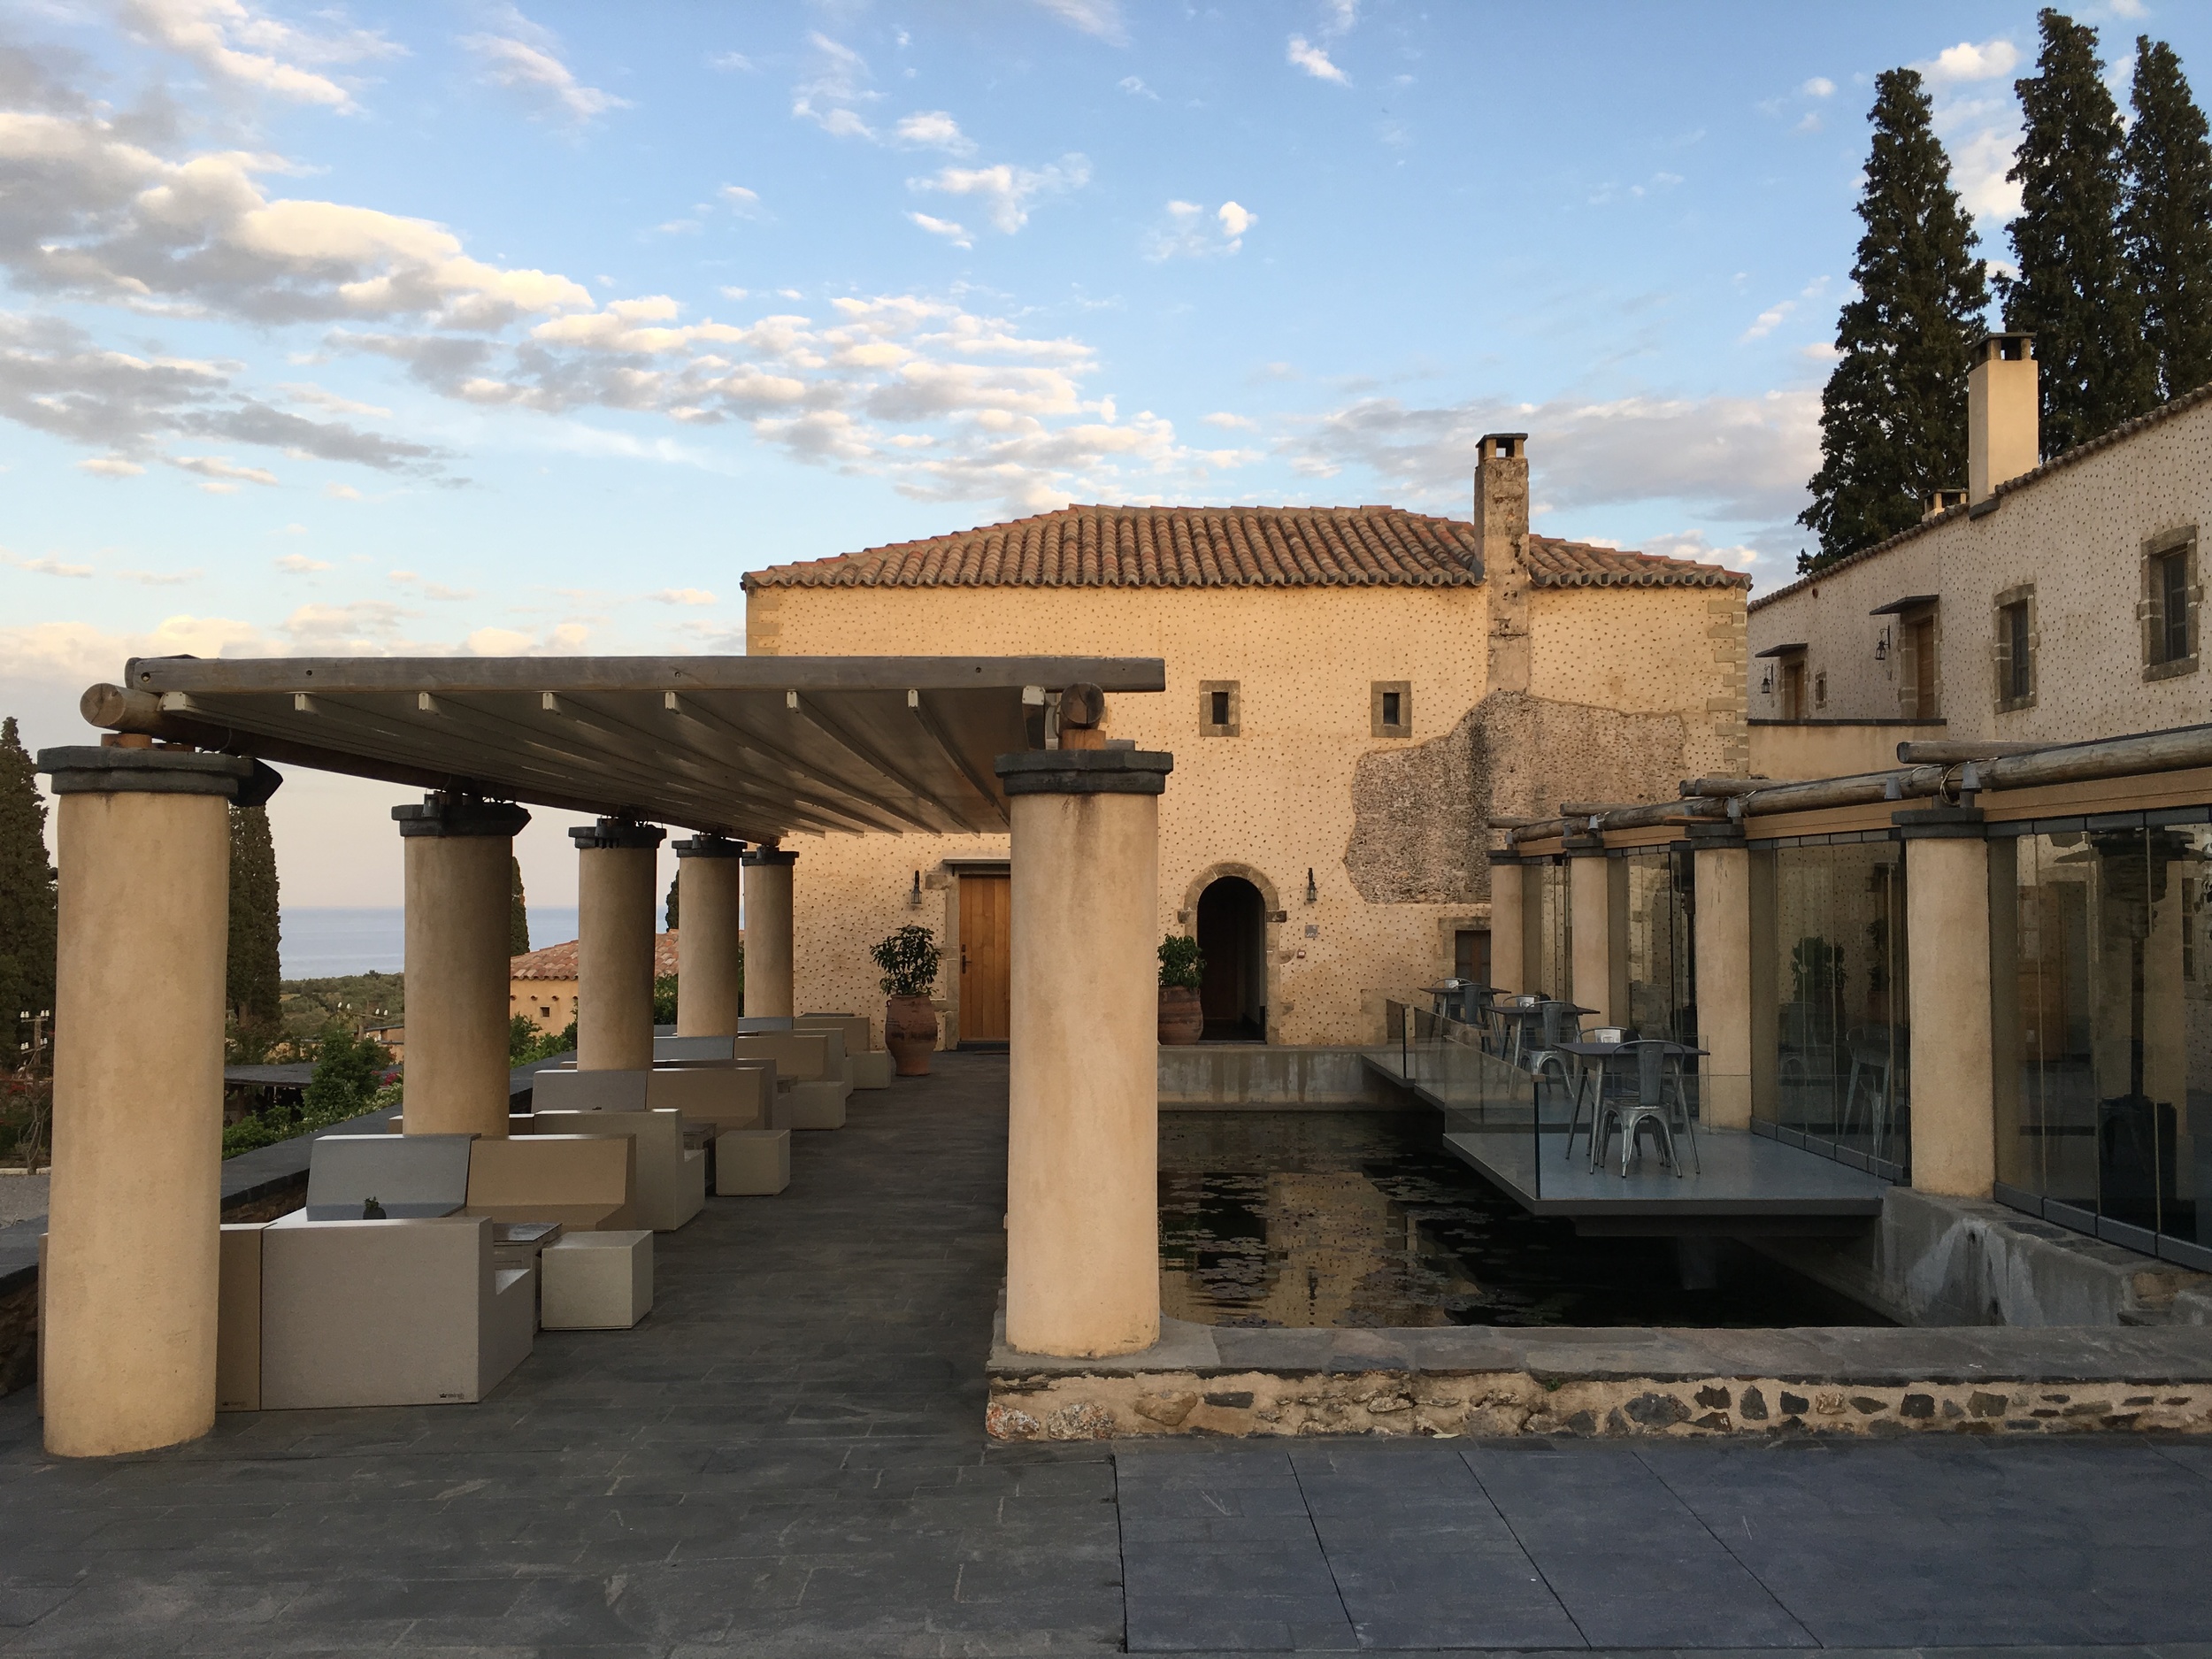 Peloponnese: Ottomans, Byzantines and Venetians at Kinsterna boutique hotel